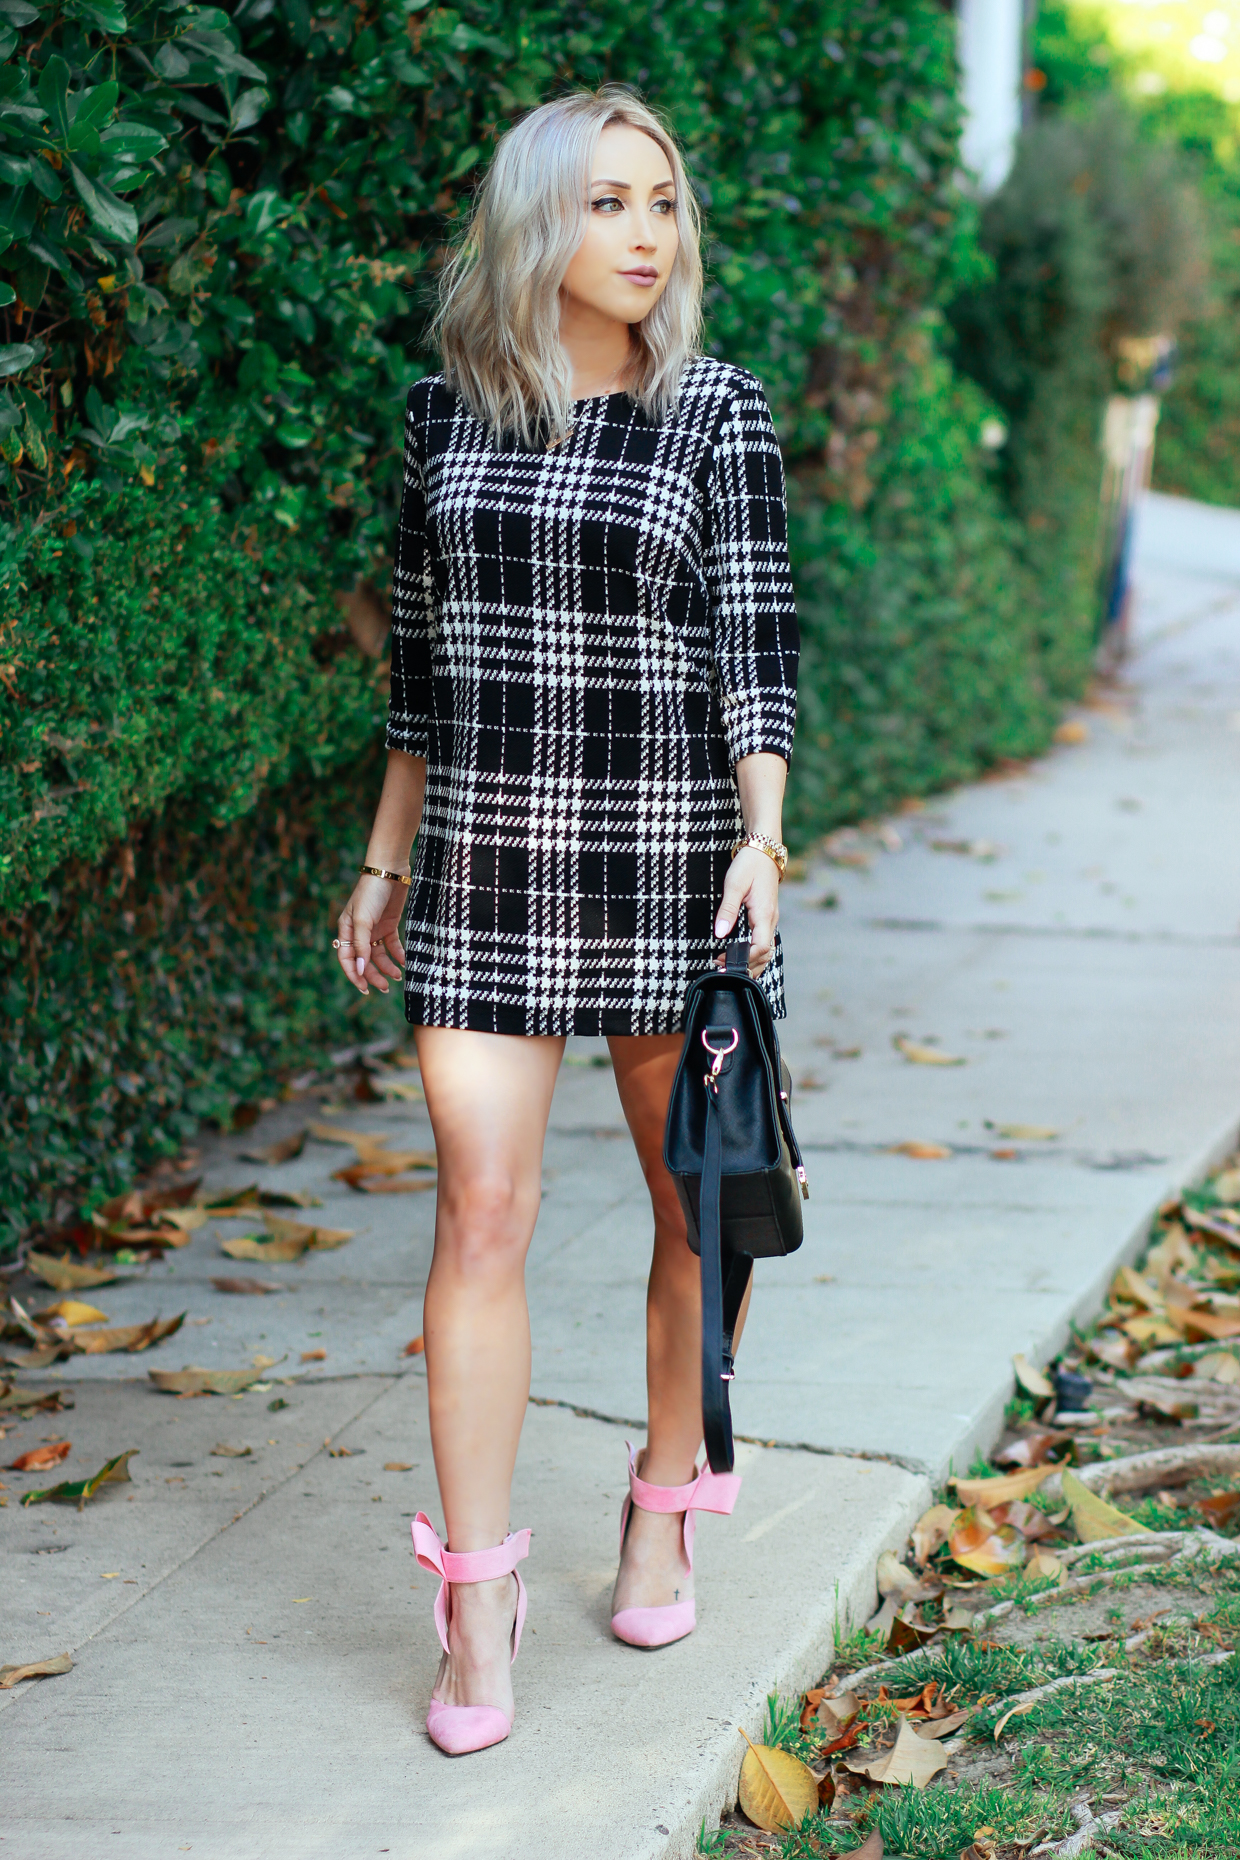 Blondie in the City | Plaid Shift Dress @forever 21 | Pink Bow Ankle Strap Heels | Business Chic